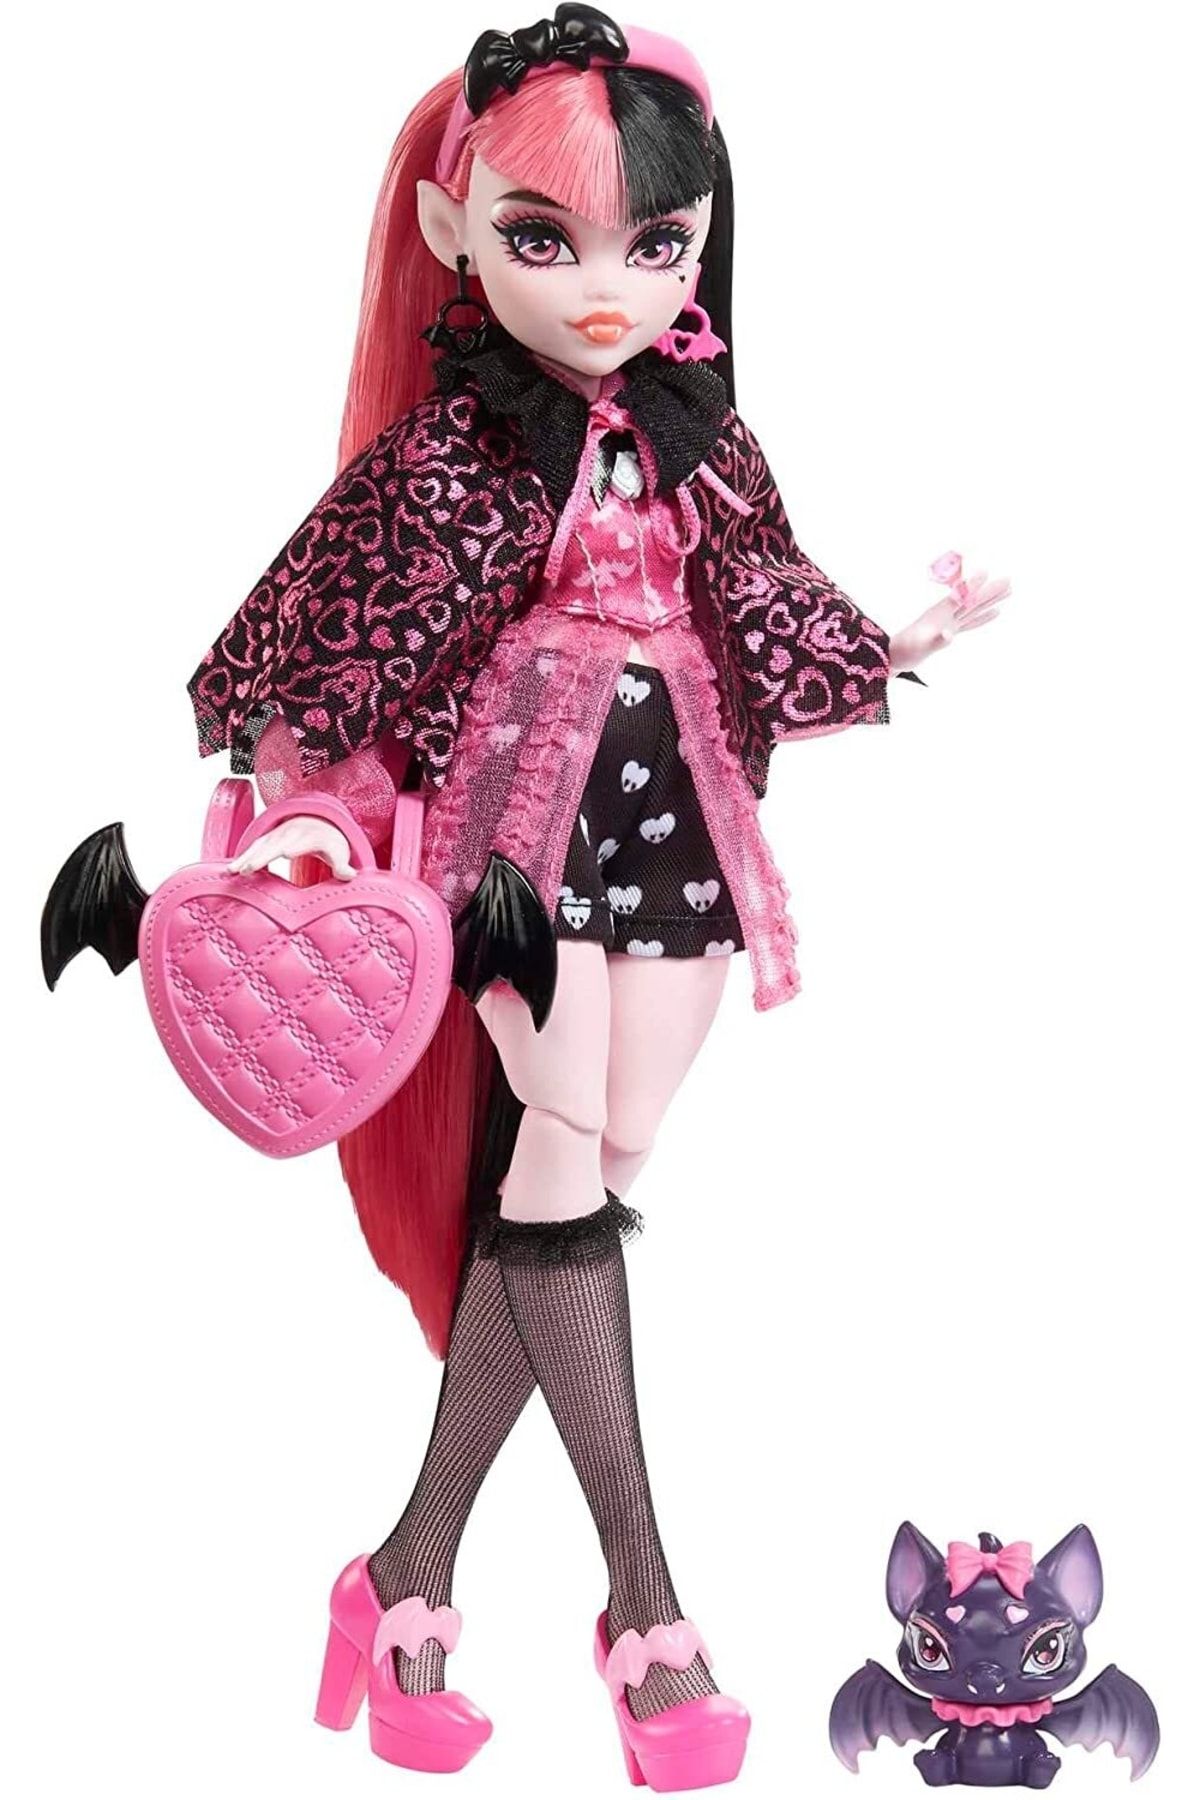 MONSTER HIGH Draculaura With Accessories And Pet Bat, Posable Fashion Doll With Pink And Black Hair????